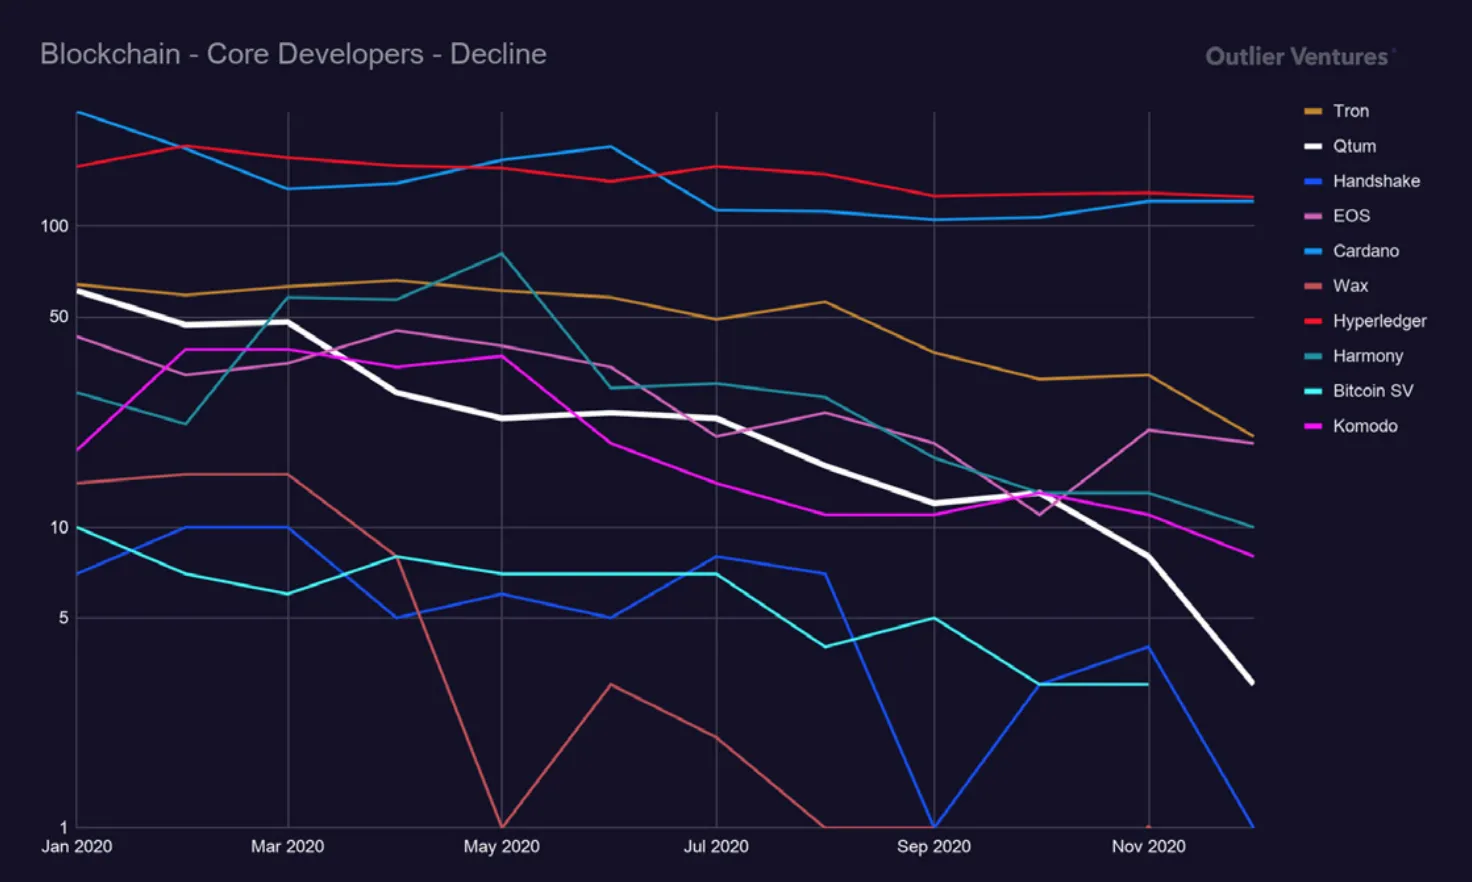 core developers in "ethereum killers" over time.